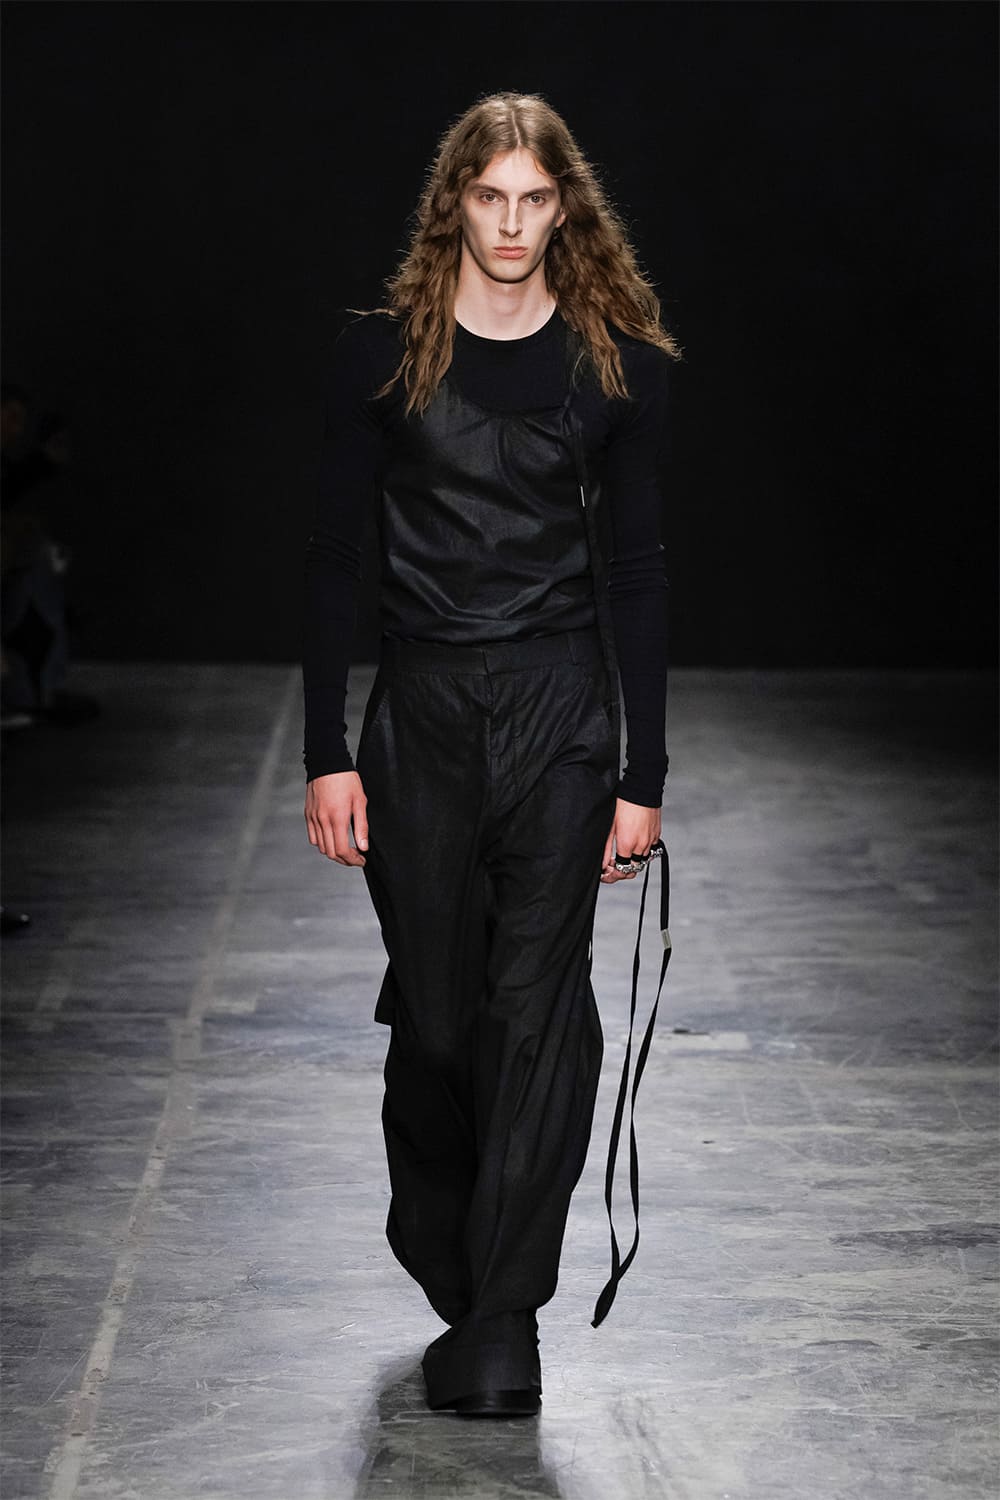 ANN DEMEULEMEESTER | COLLECTION | HOUYHNHNM 